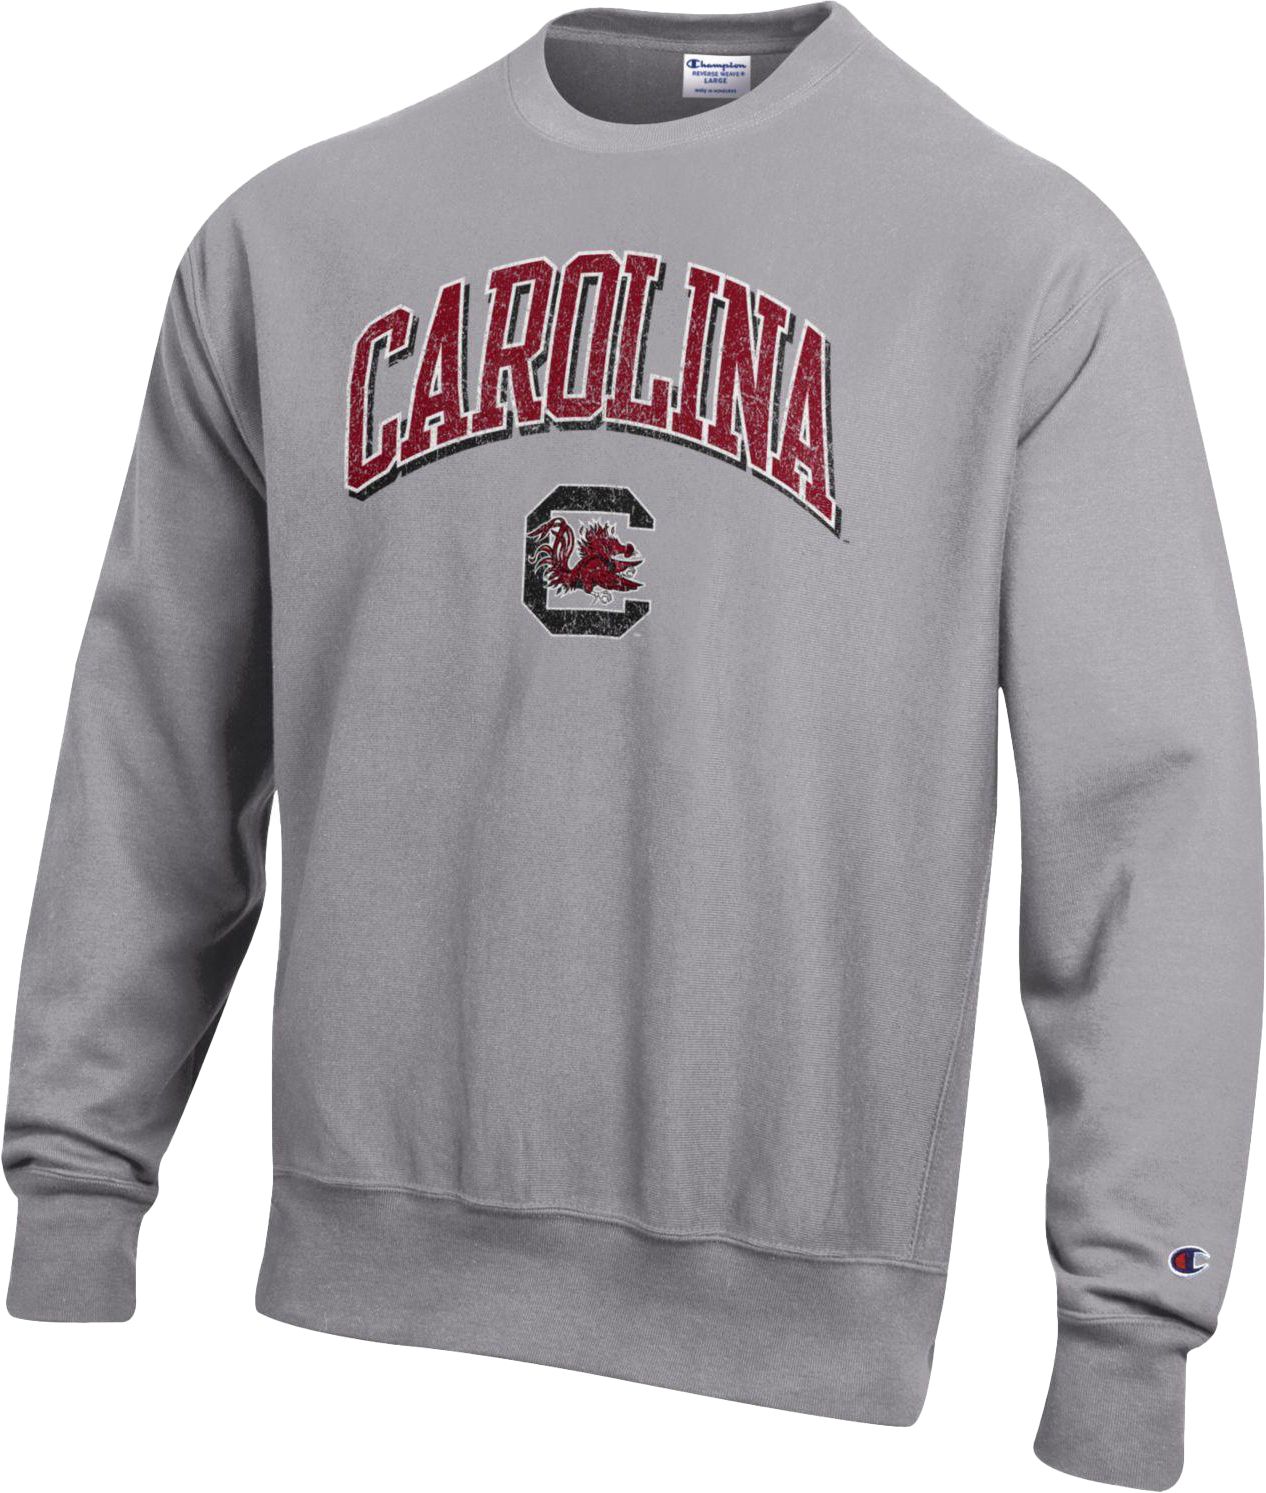 gamecock pullover